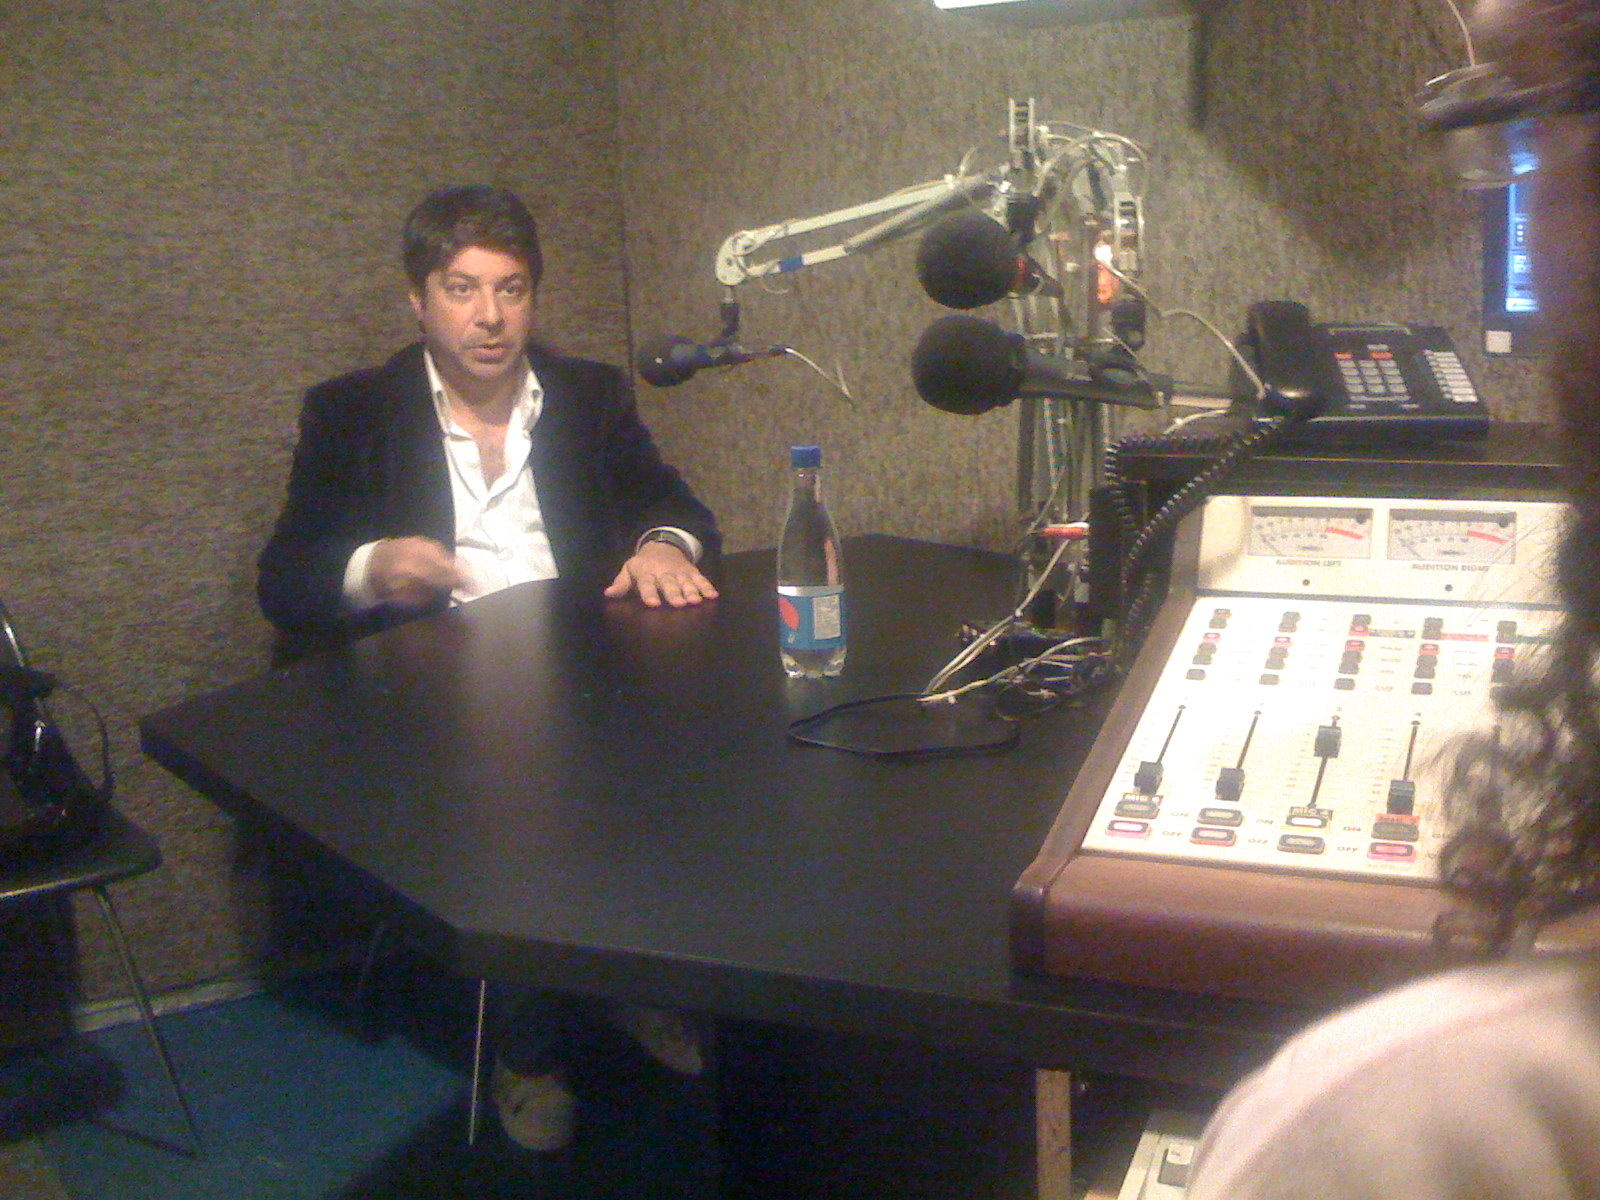 Radio interview in Montreal.